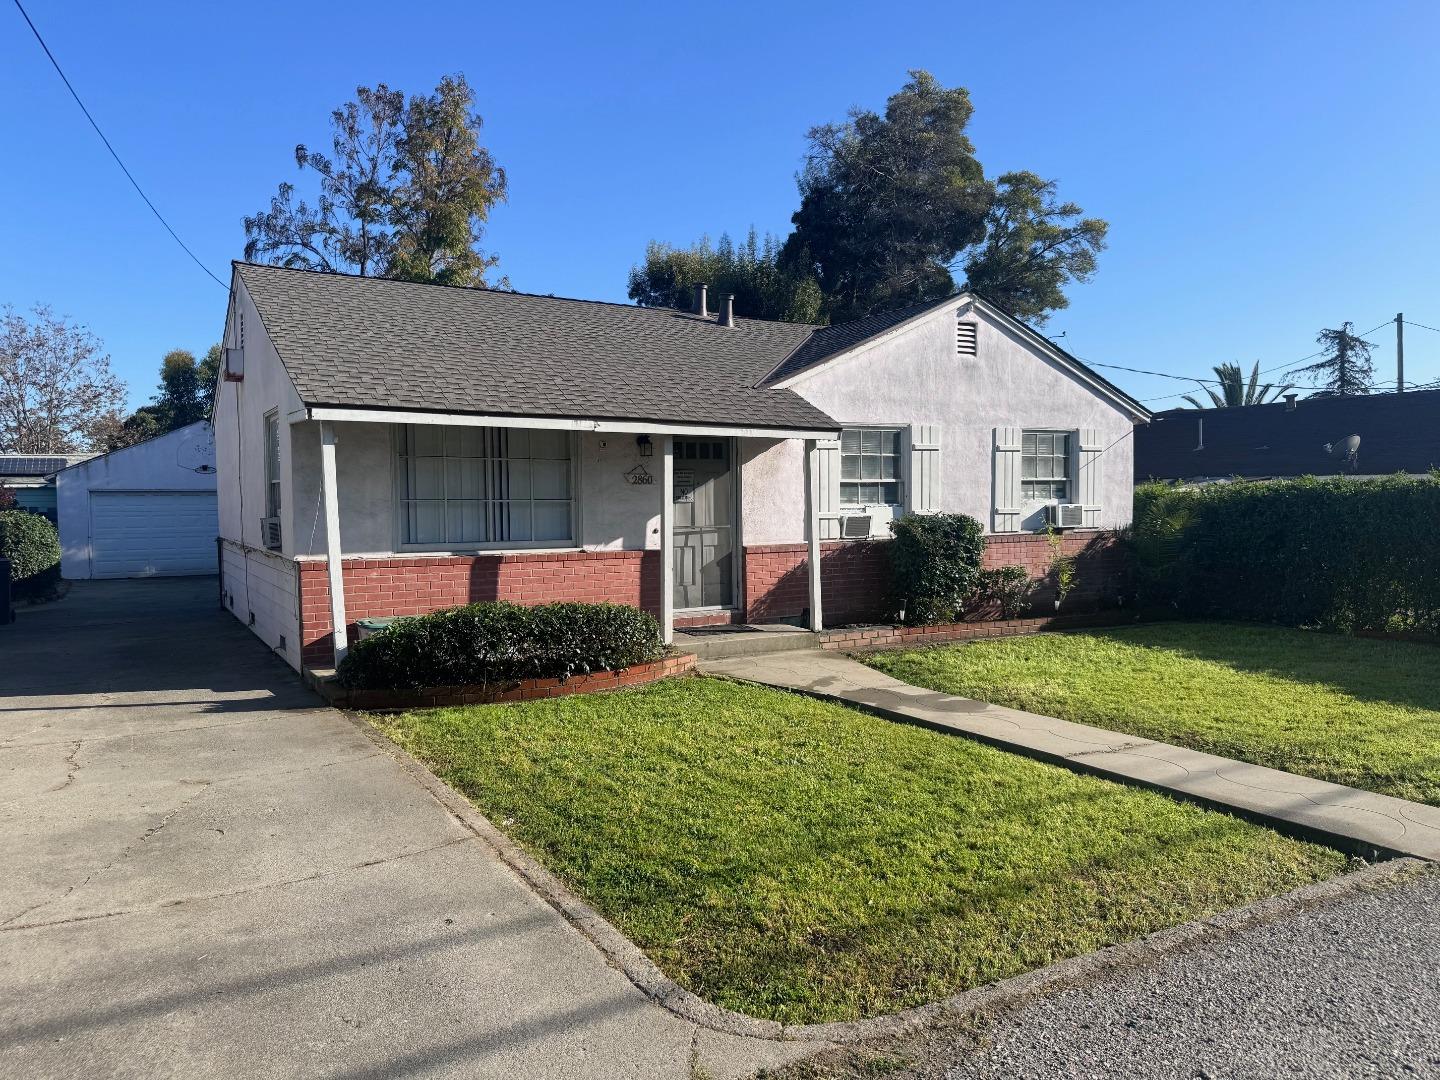 Photo of 2860 Florence Ave in San Jose, CA